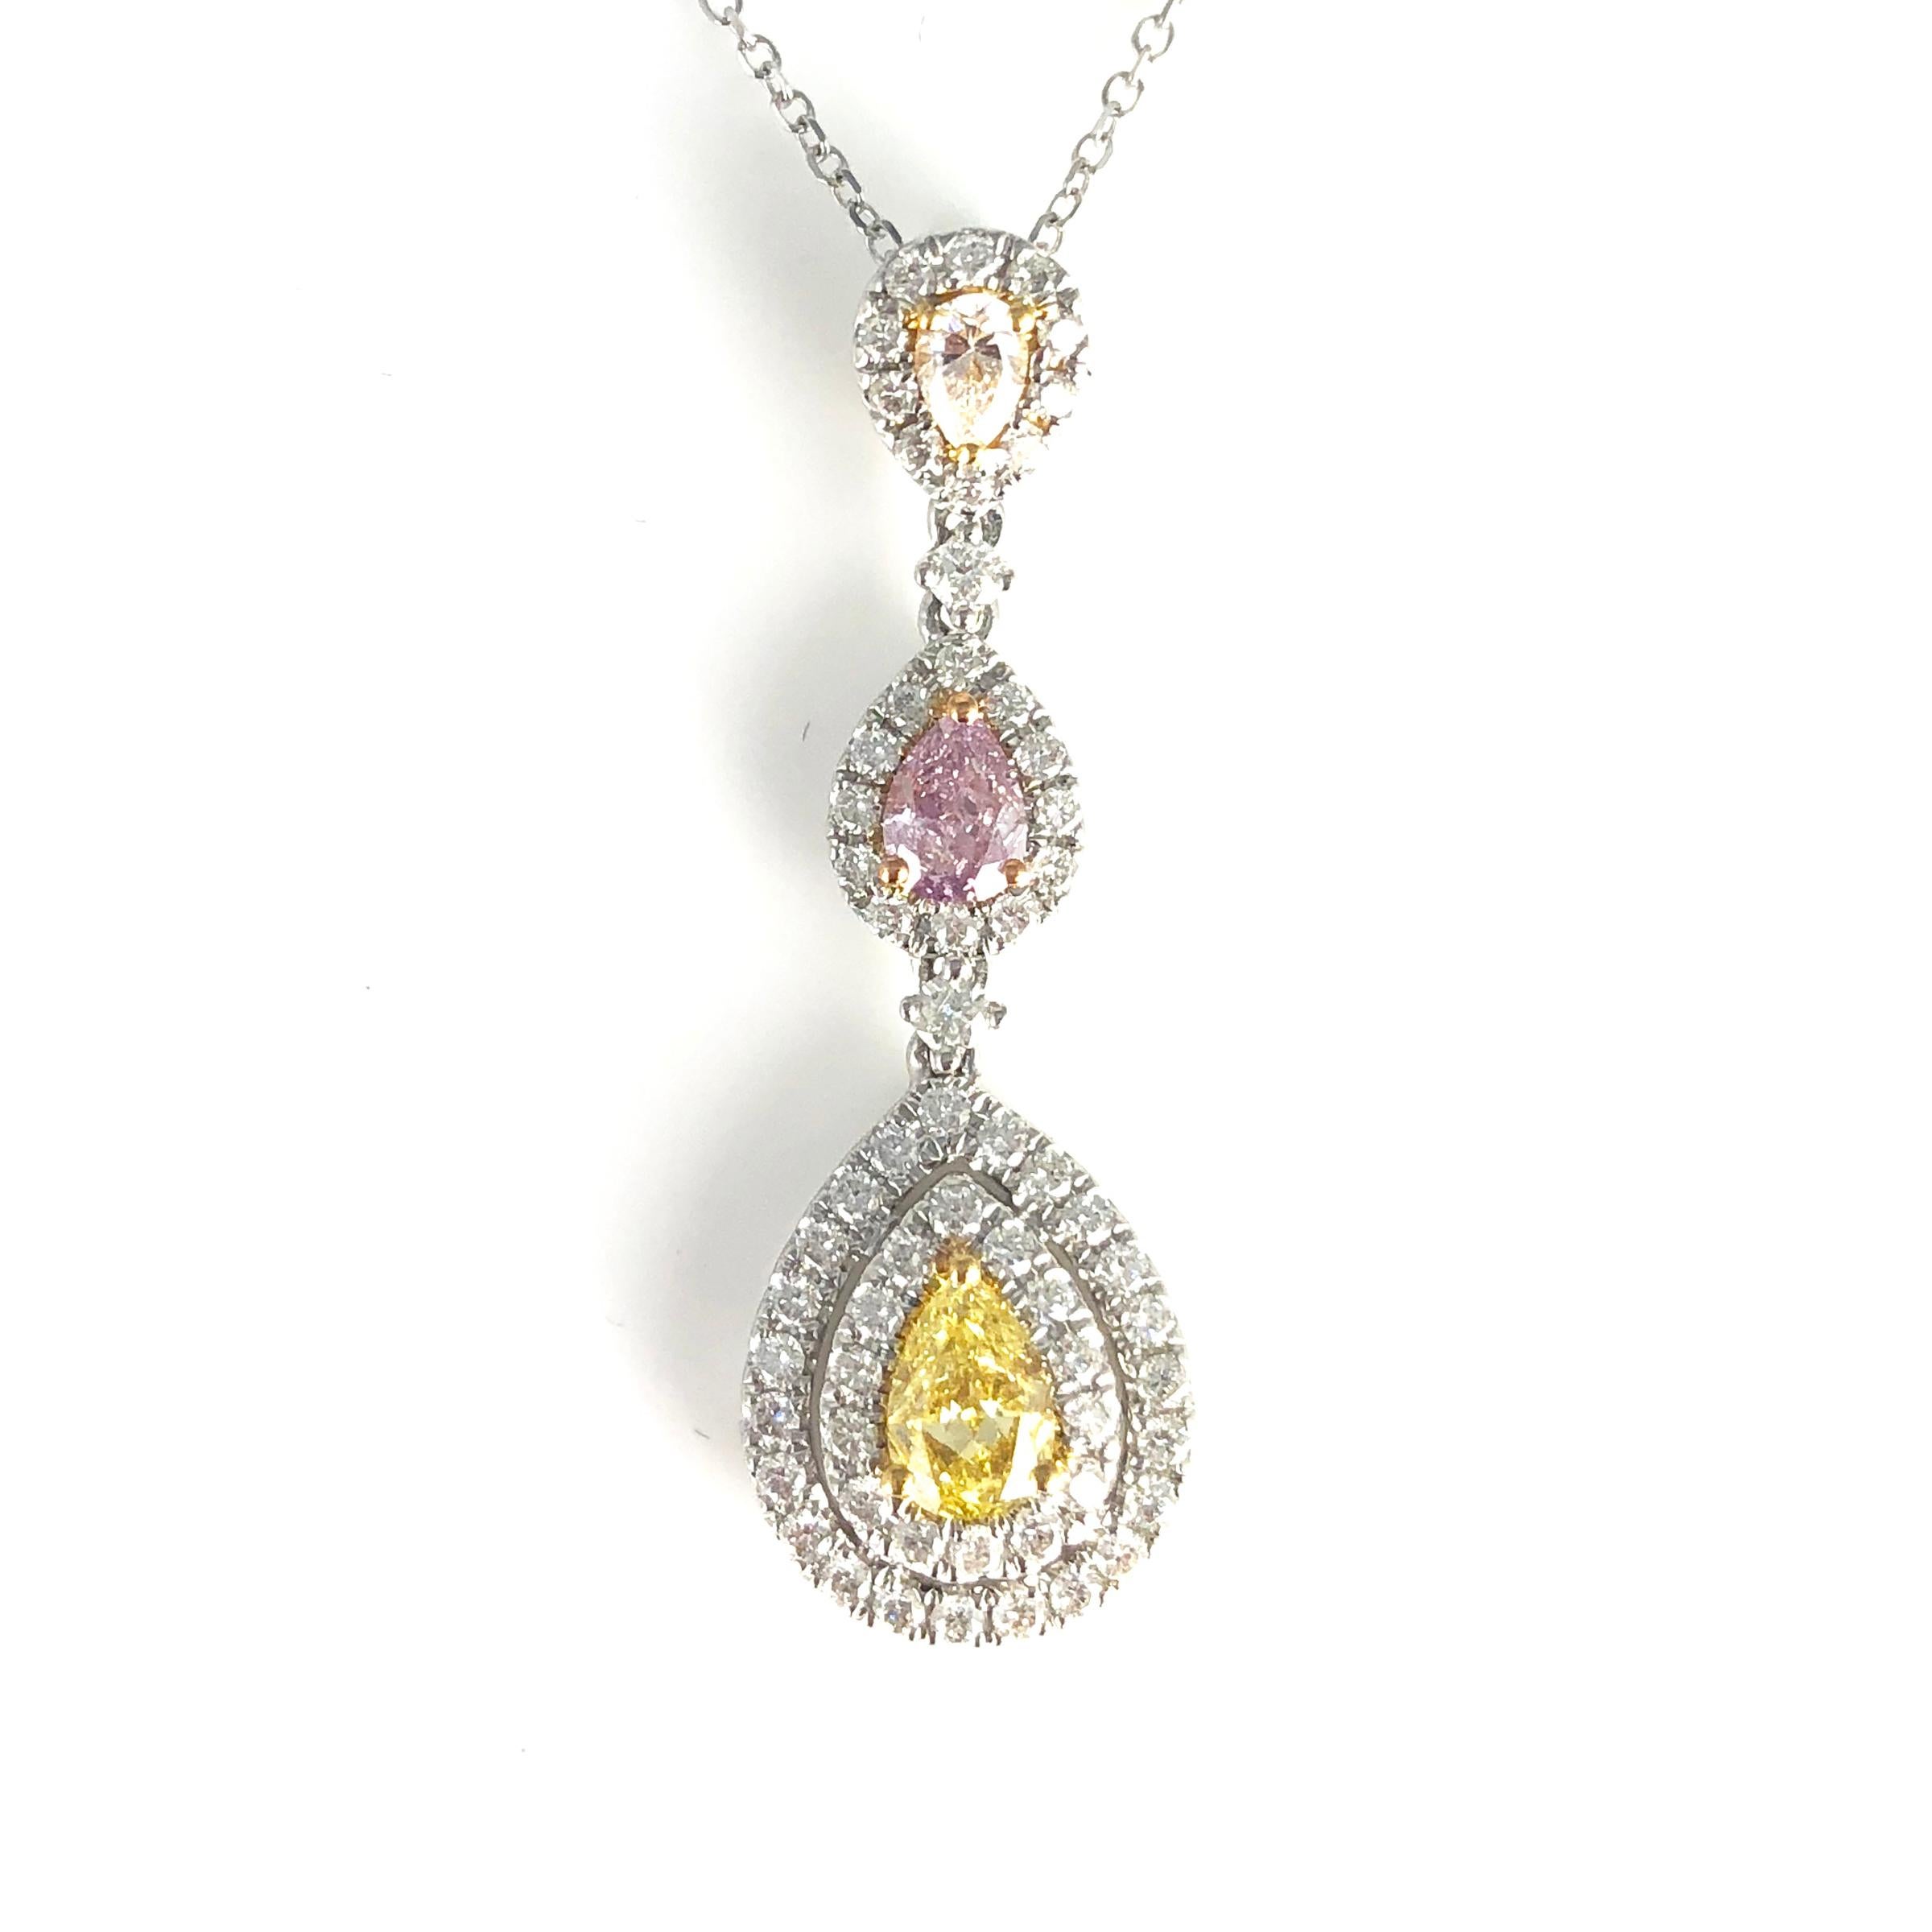 This stunning pendant features three pear shape natural color diamonds, arranged in three tiers, and surrounded by halos of round white diamonds.

The larger stone is a 0.31 carat GIA Certified Natural Fancy Orange Yellow diamond.
The second tier is